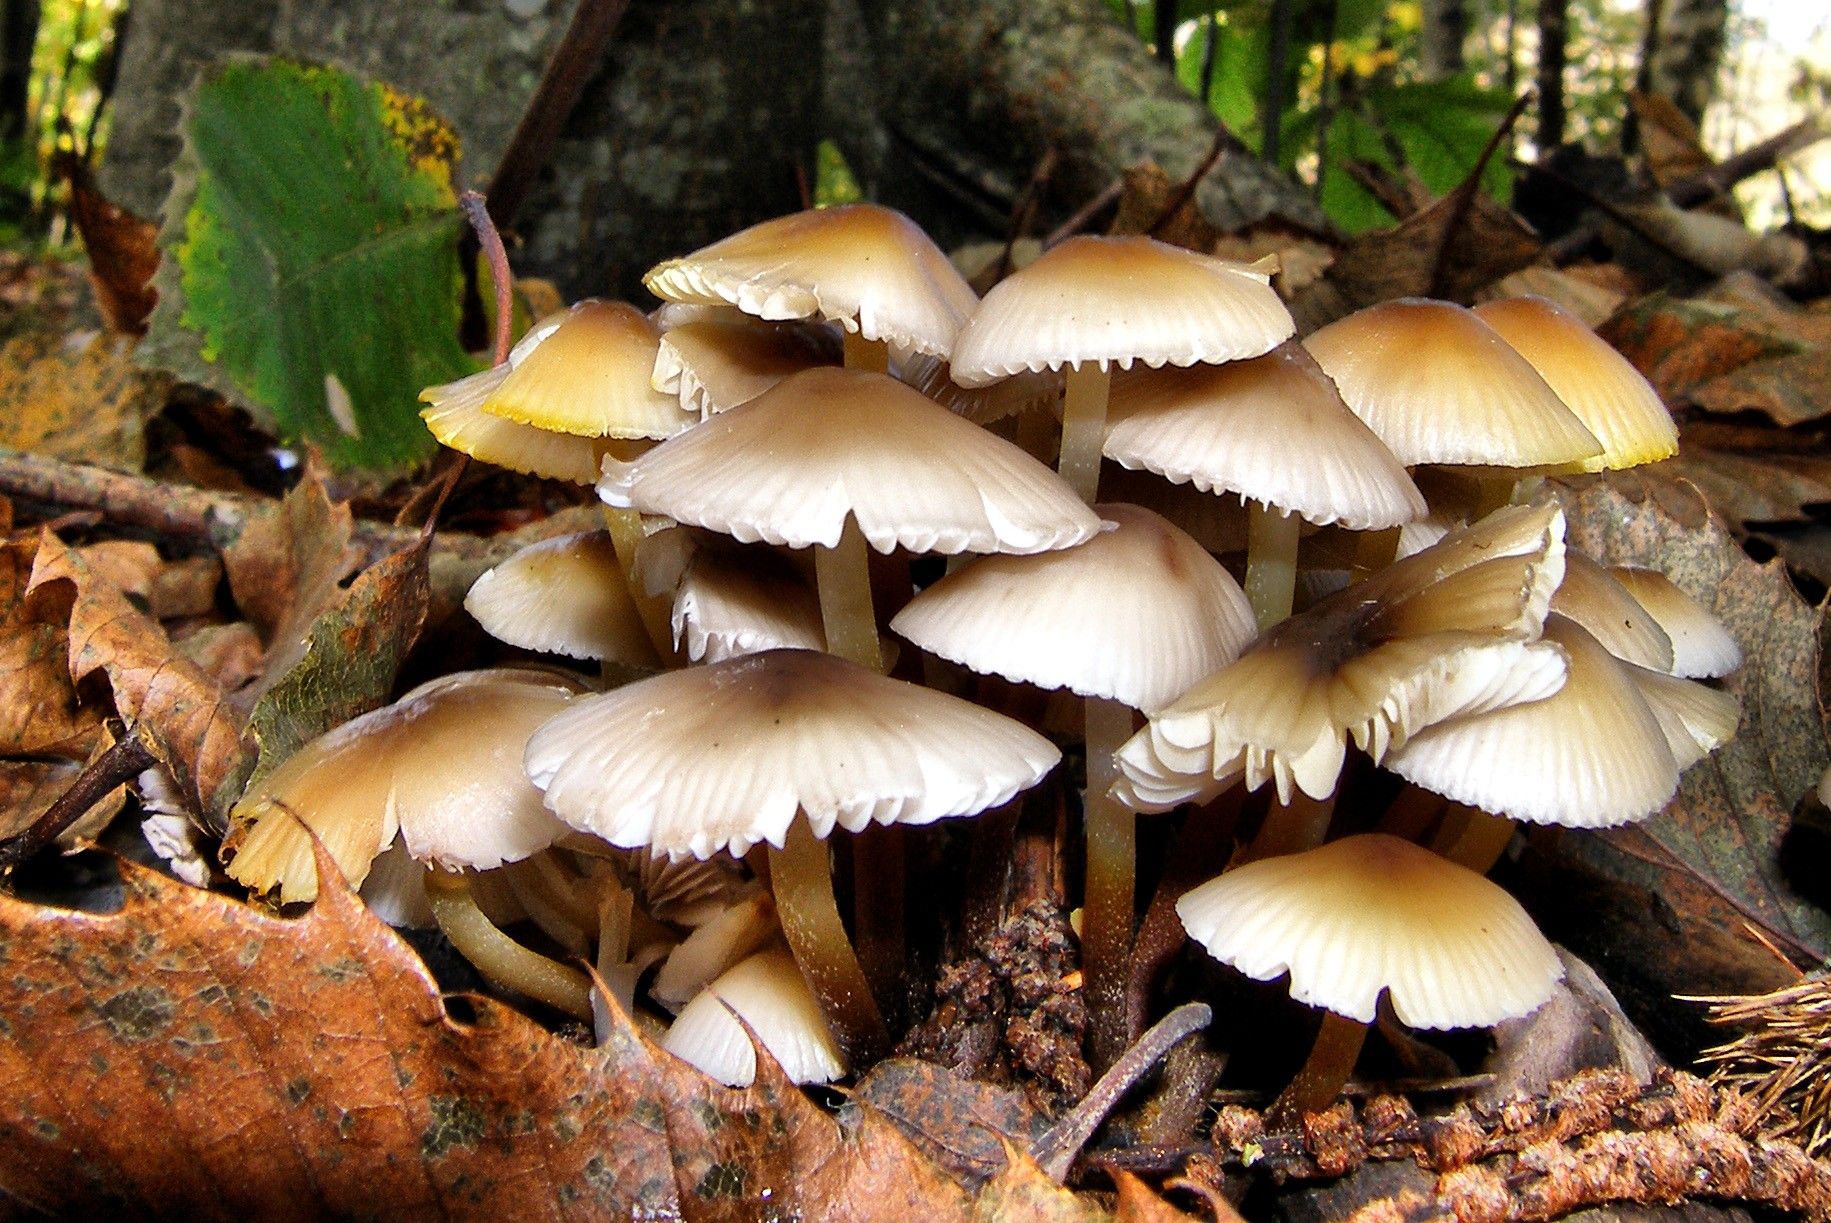 Forest mushrooms picture, by patty for: mushrooms photography ...